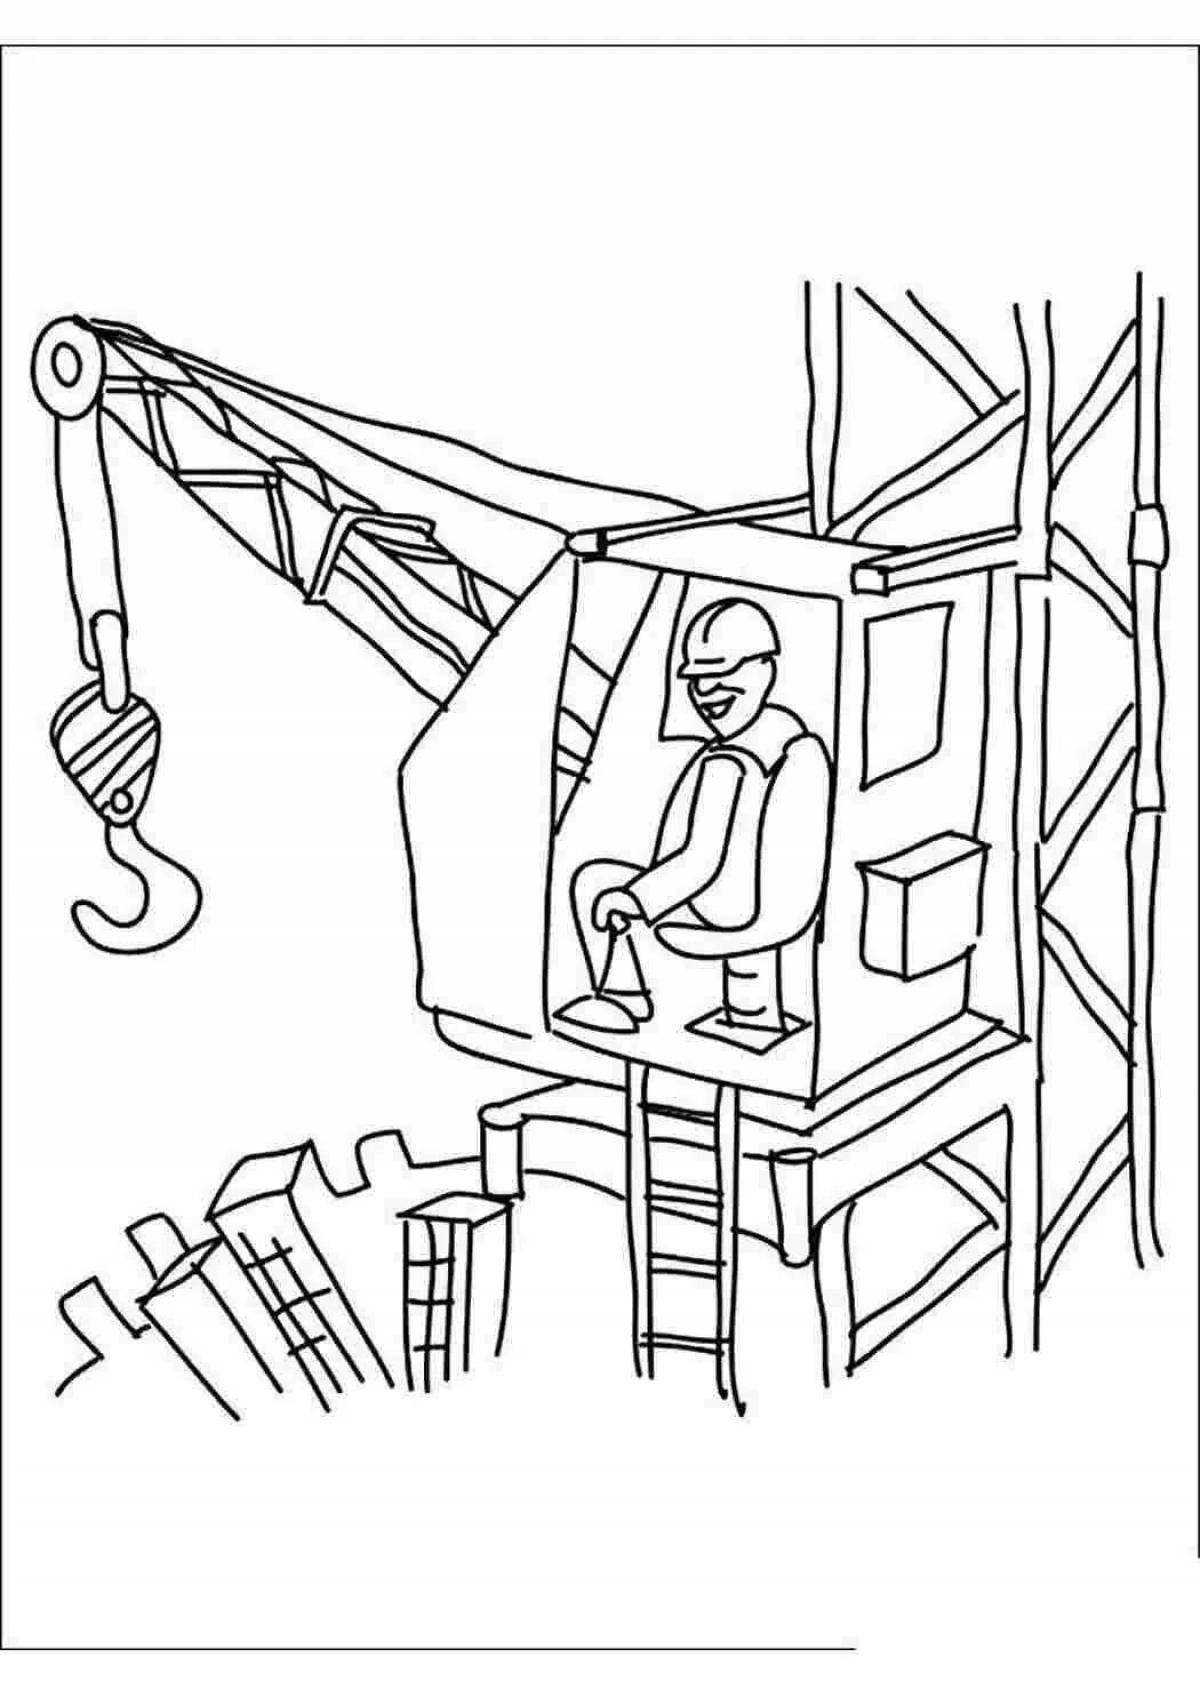 Builder's imagination coloring page